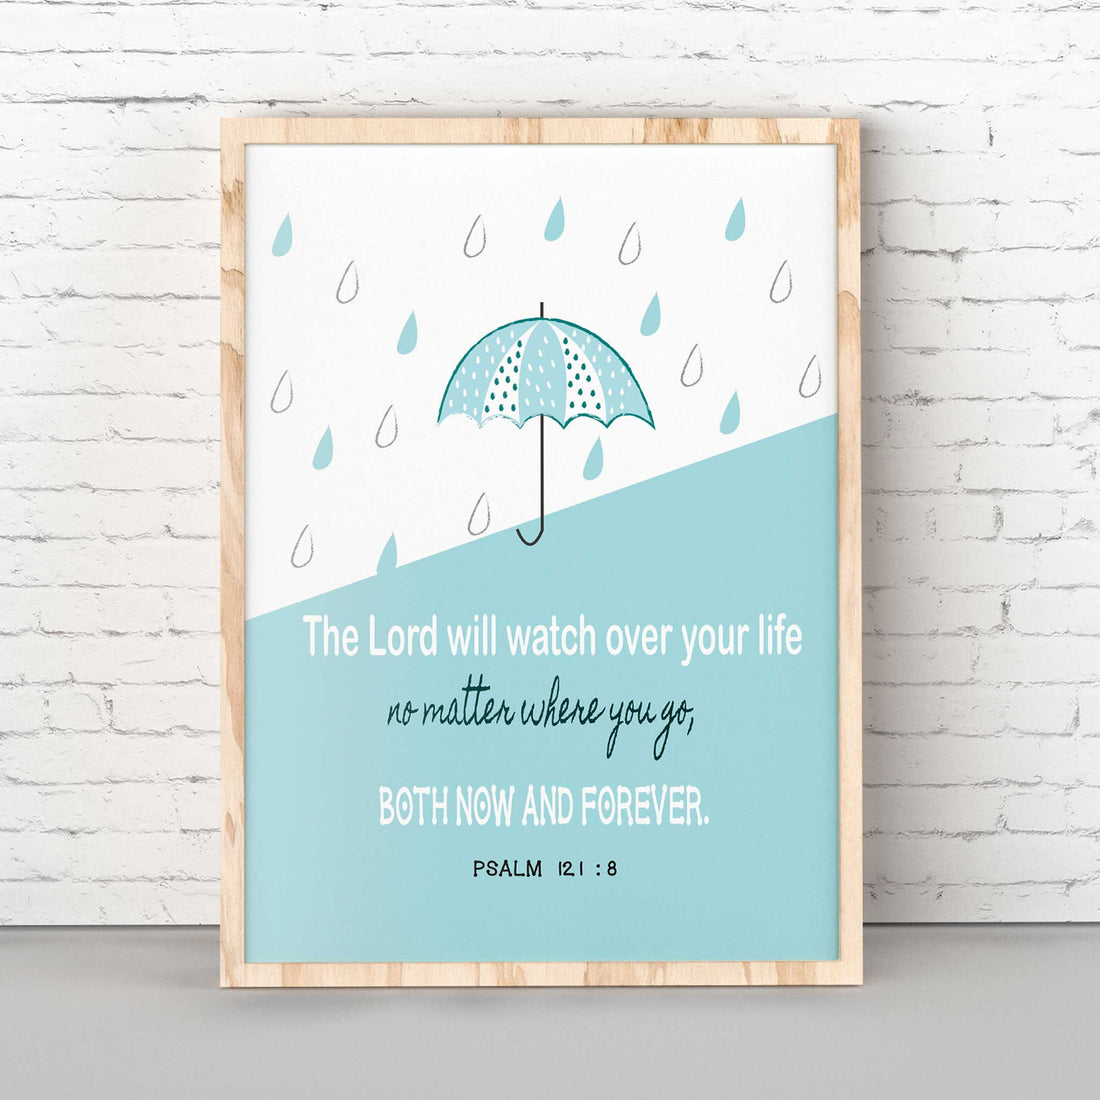 Mint Raindrop-Psalm 121:8 The Lord will watch over your life, no matter where you go, both now and forever. Adorable mint green umbrella and the Bible verse Psalms 121:8 This wall art is perfect for hanging in a bedroom or playroom. It makes a tremendous Christian baby shower gift, too! This delightful piece of wall art is perfect for any kid's room and is sure to bring a smile to your little one's face each time they see it. Digital Printable Files.